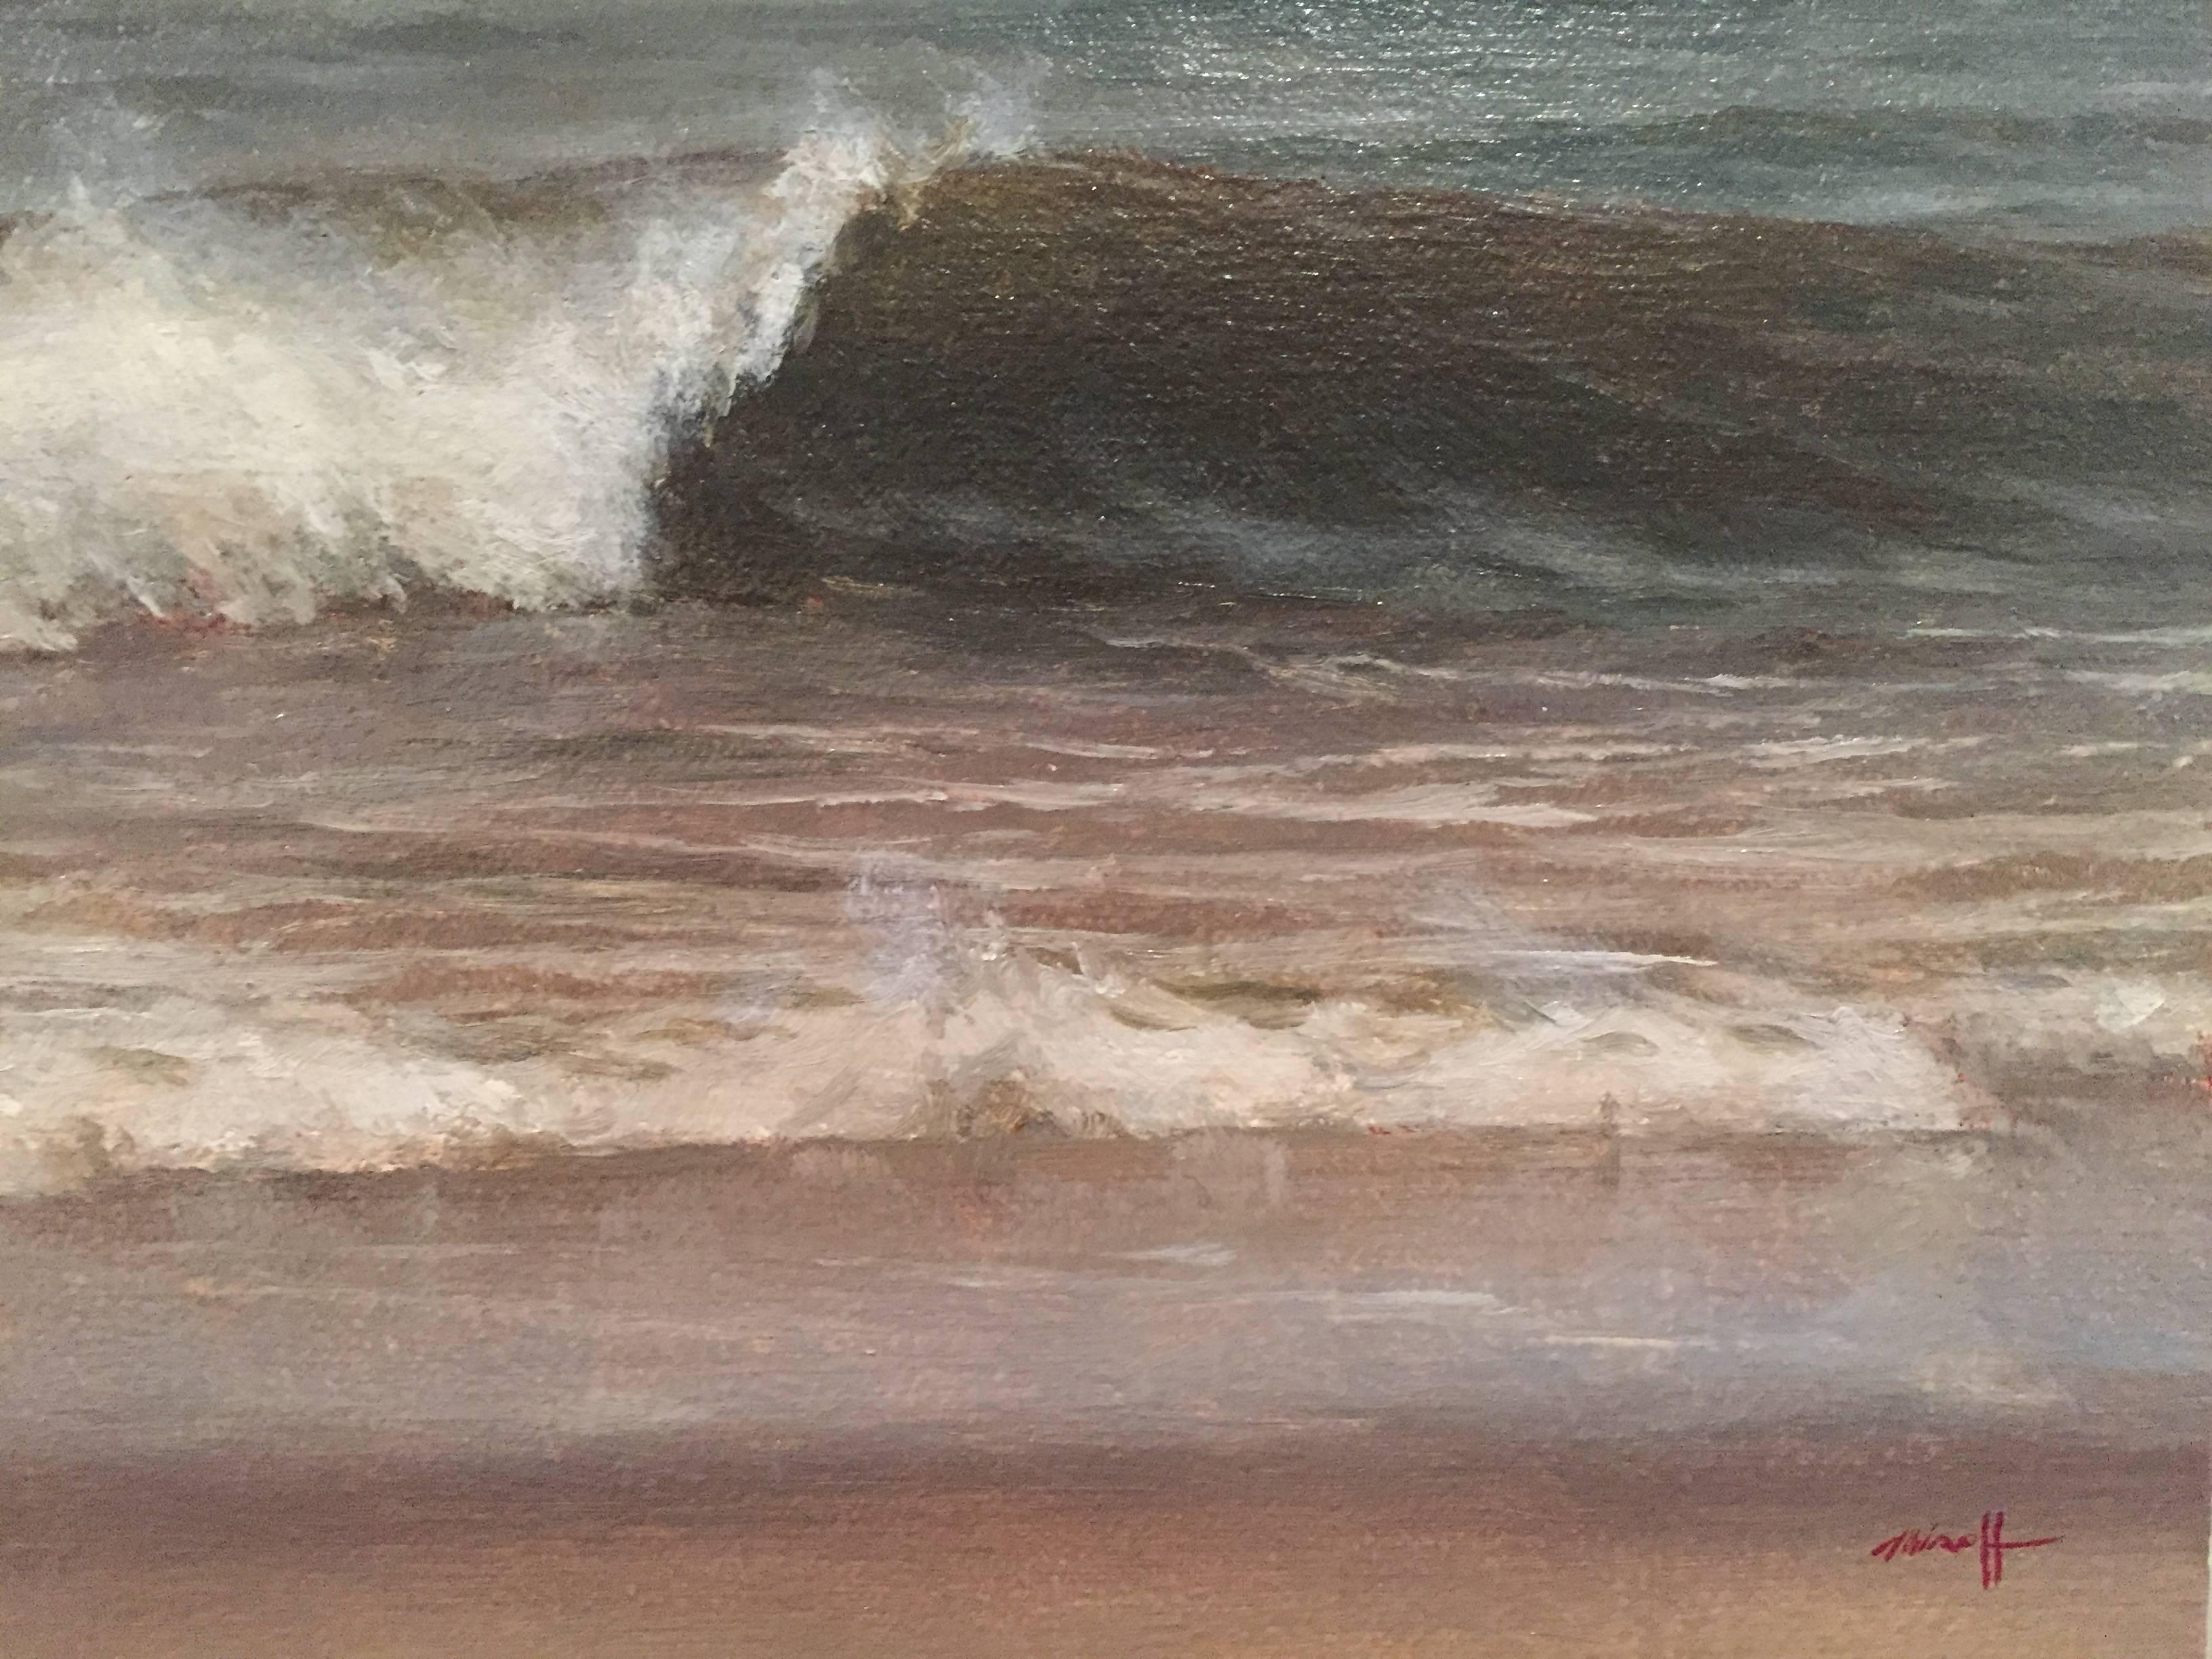 Painted en plein-air, this small oil on panel painting is a realistic interpretation of an east-coast wave crashing onto the shore. Layers of water push and pull back and forth, leaving trails of color.

Edward Minoff Graduated with honors from